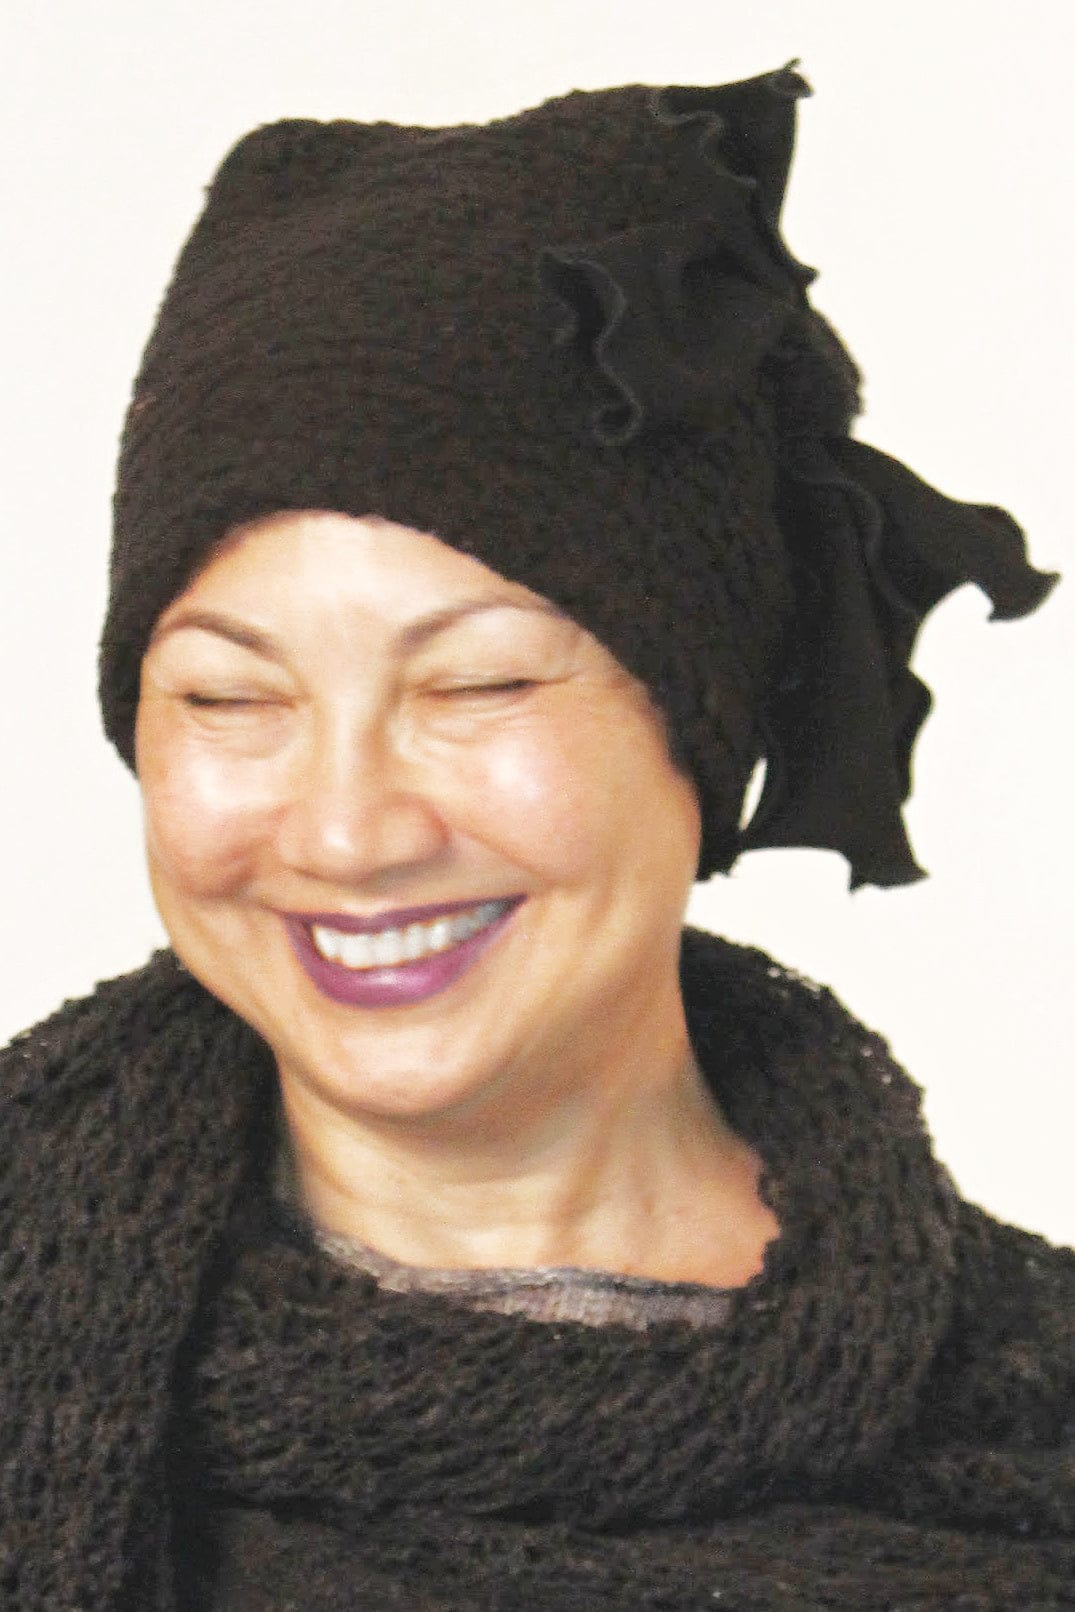 Woman smiling wearing a pull on soft black winter hat with a black side bow.